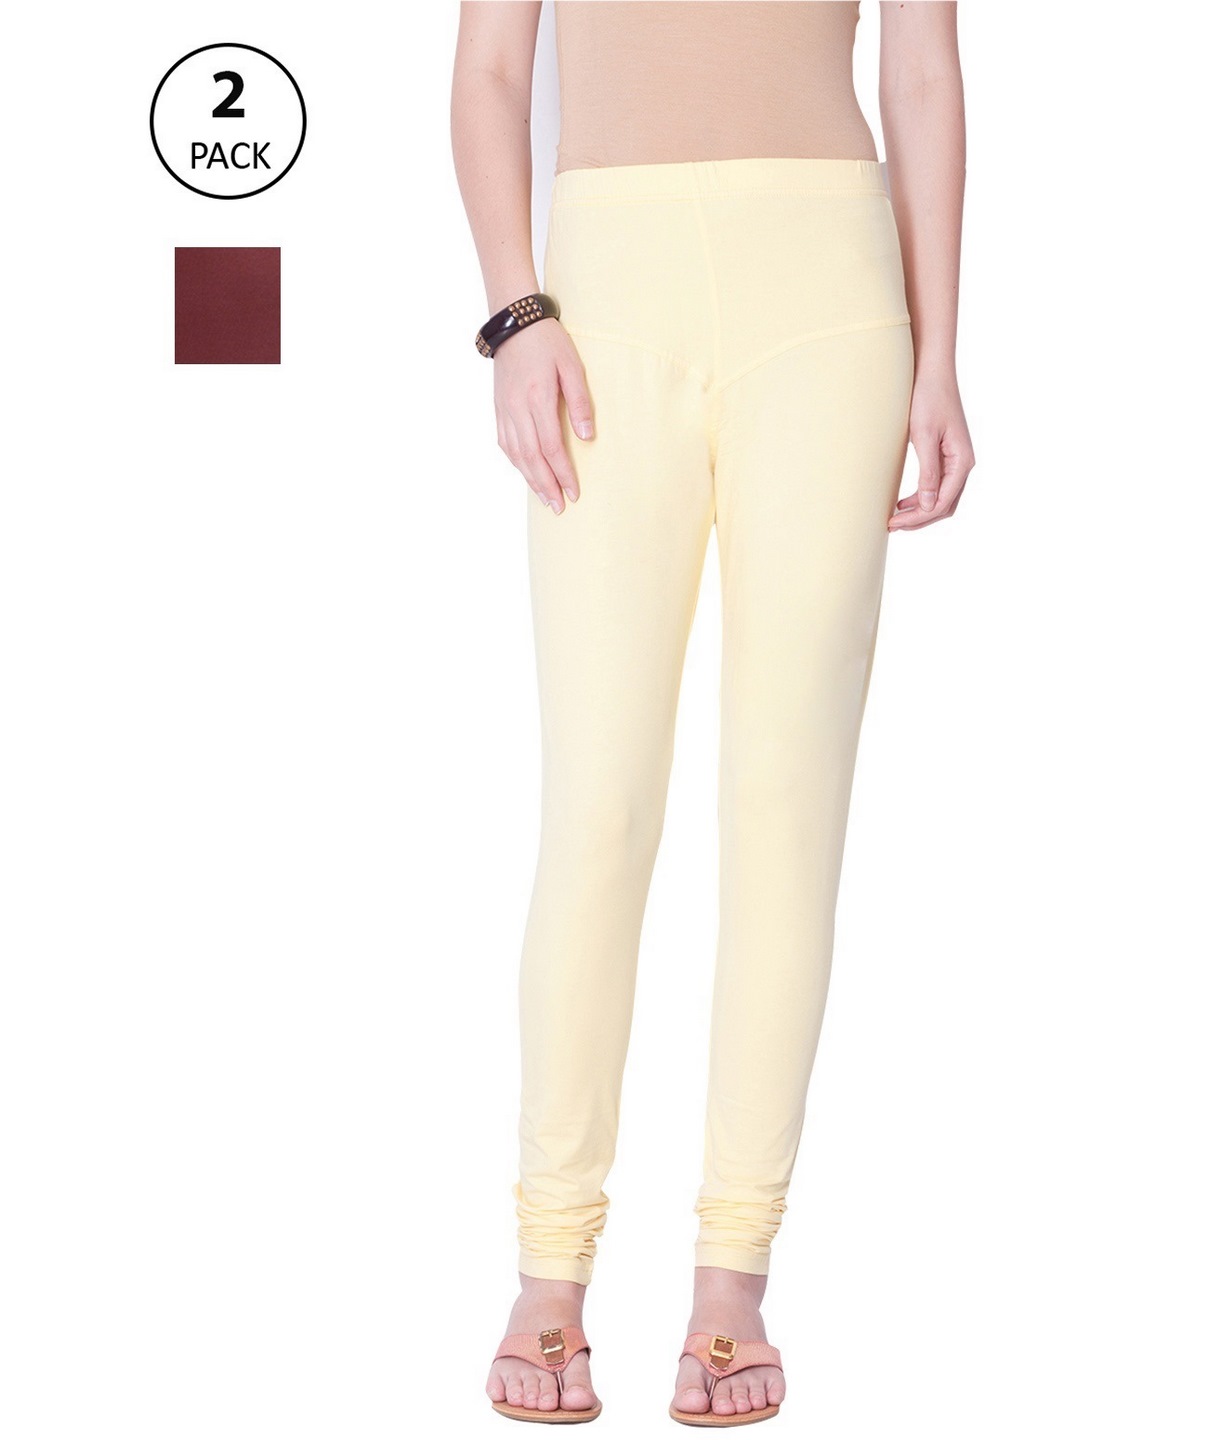 Cream Legging Leggings - Buy Cream Legging Leggings online in India-sonthuy.vn